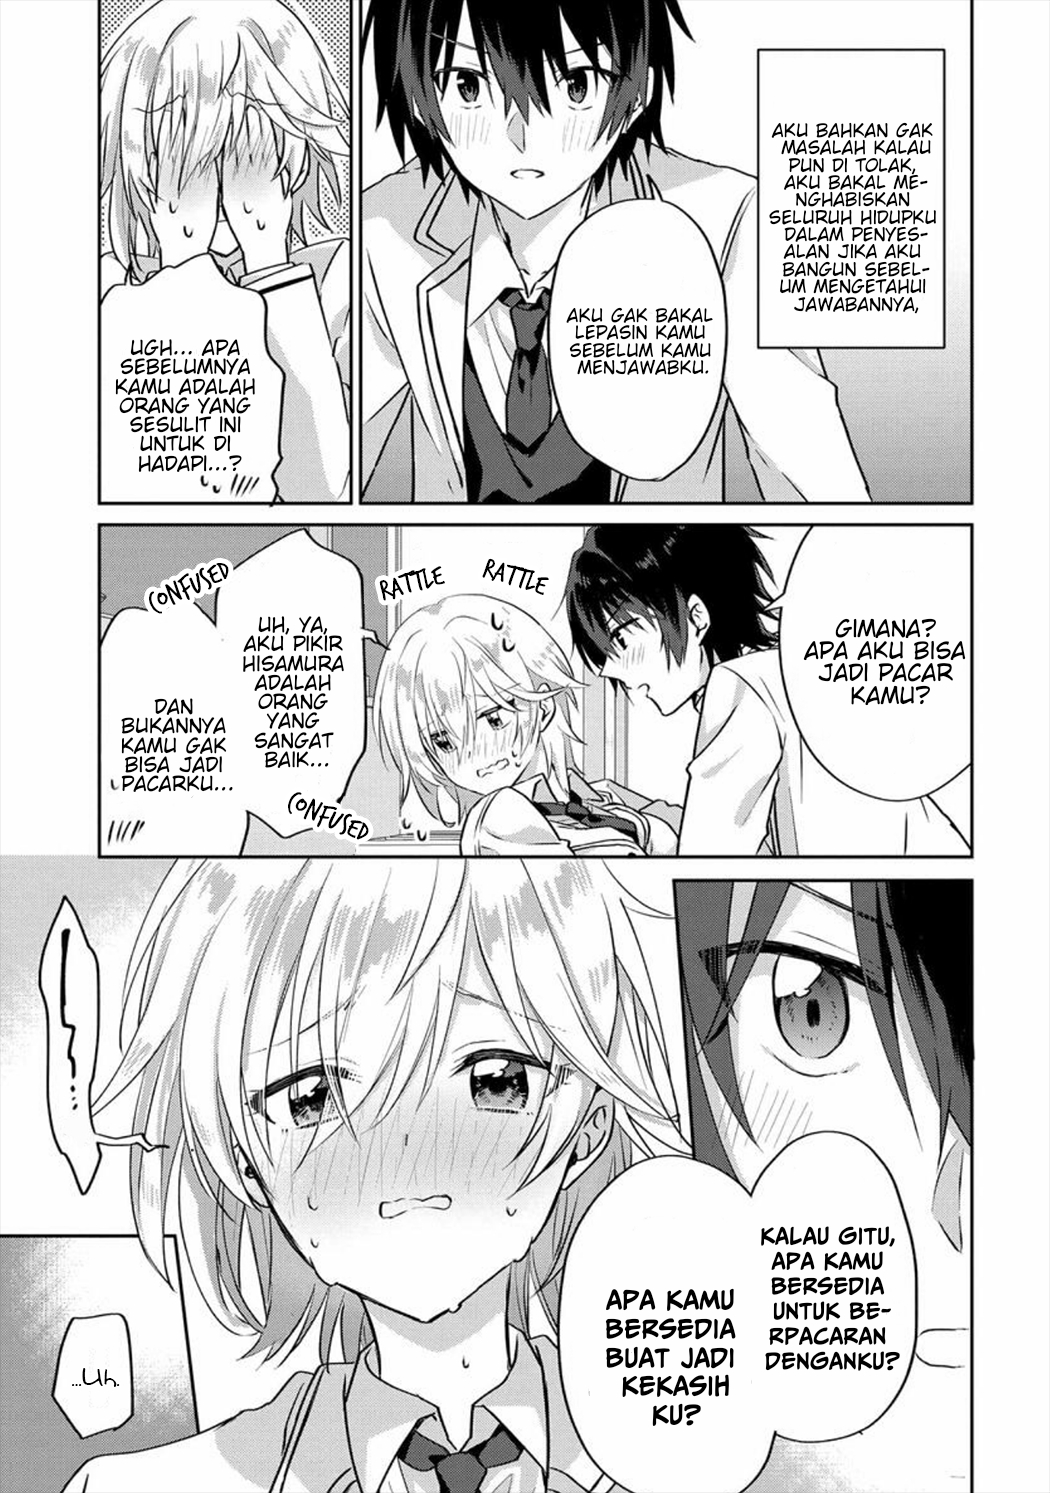 Since I'Ve Entered The World Of Romantic Comedy Manga, I'Ll Do My Best To Make The Losing Heroine Happy. Chapter 1 - 255